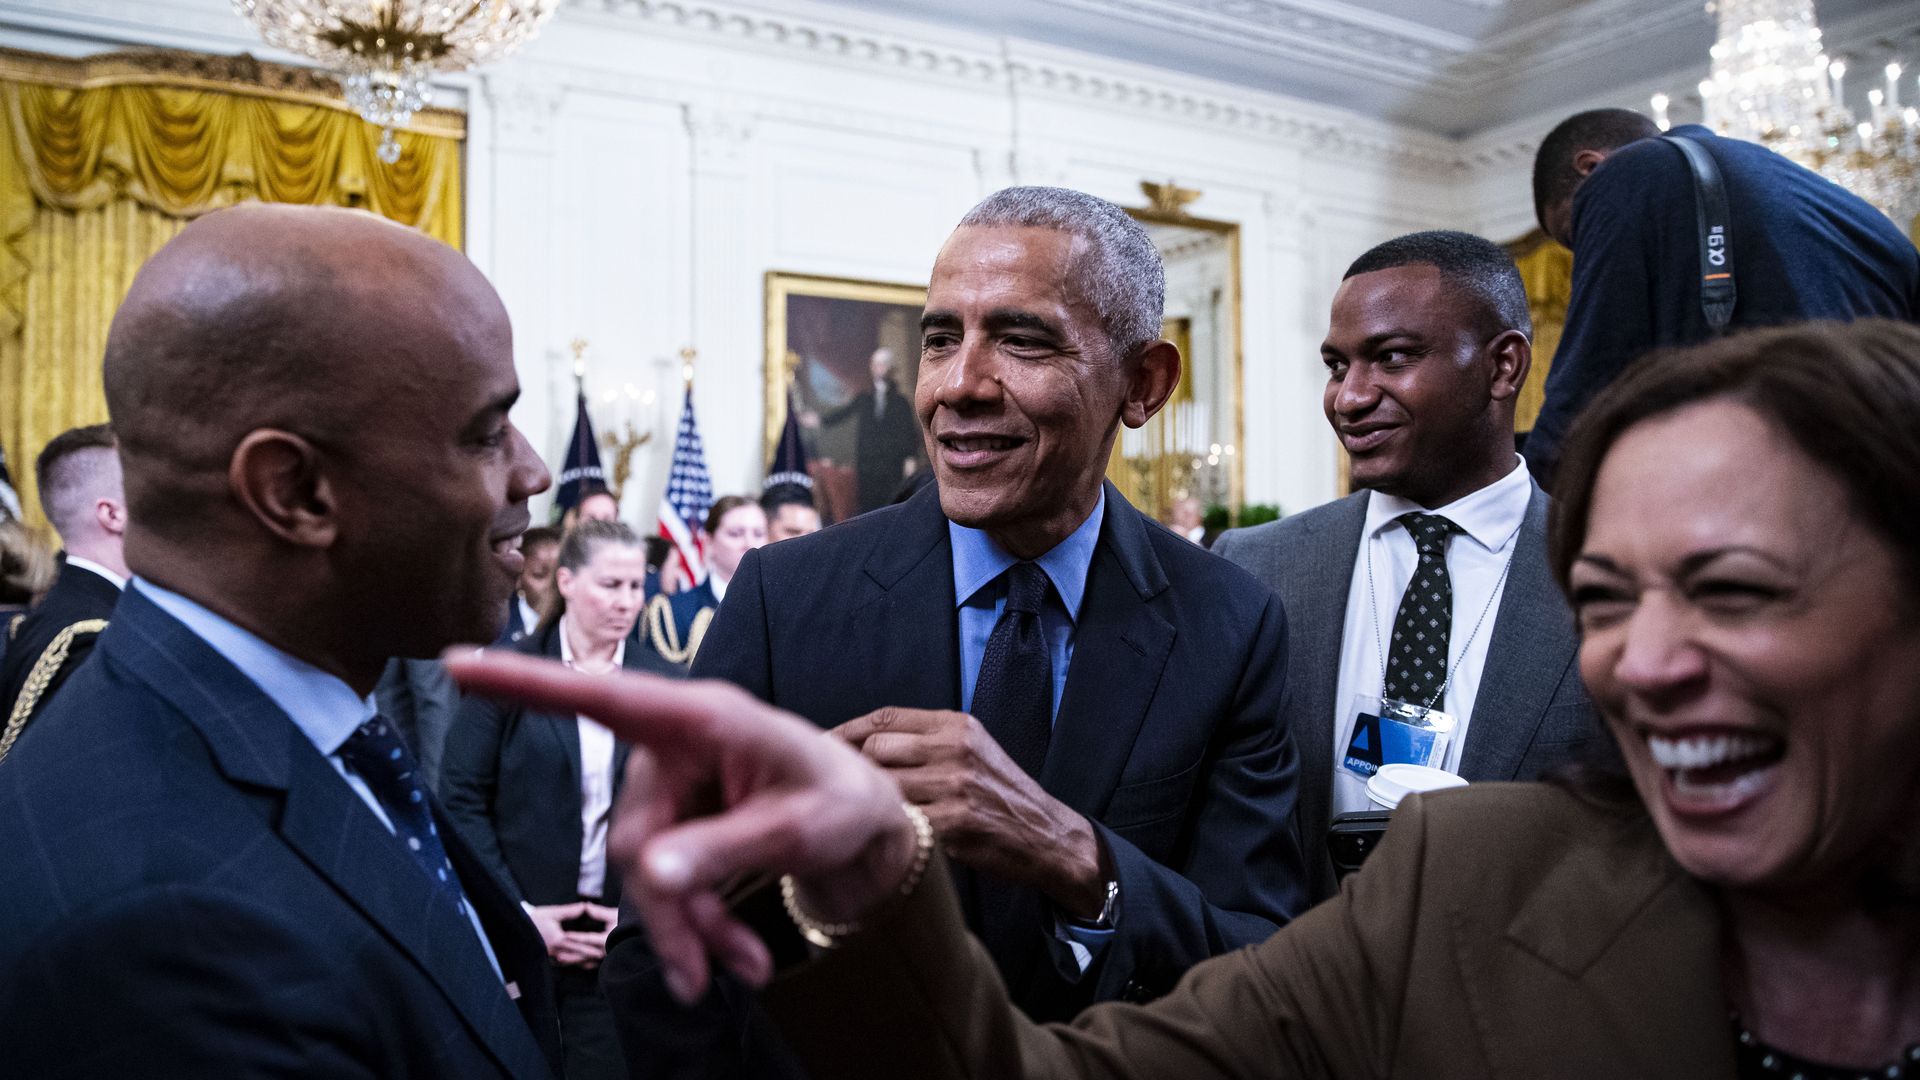 Former President Barack Obama, wearing a navy suit, shirt and tie, greets attendees at a White House event along with Vice President Kamala Harris.